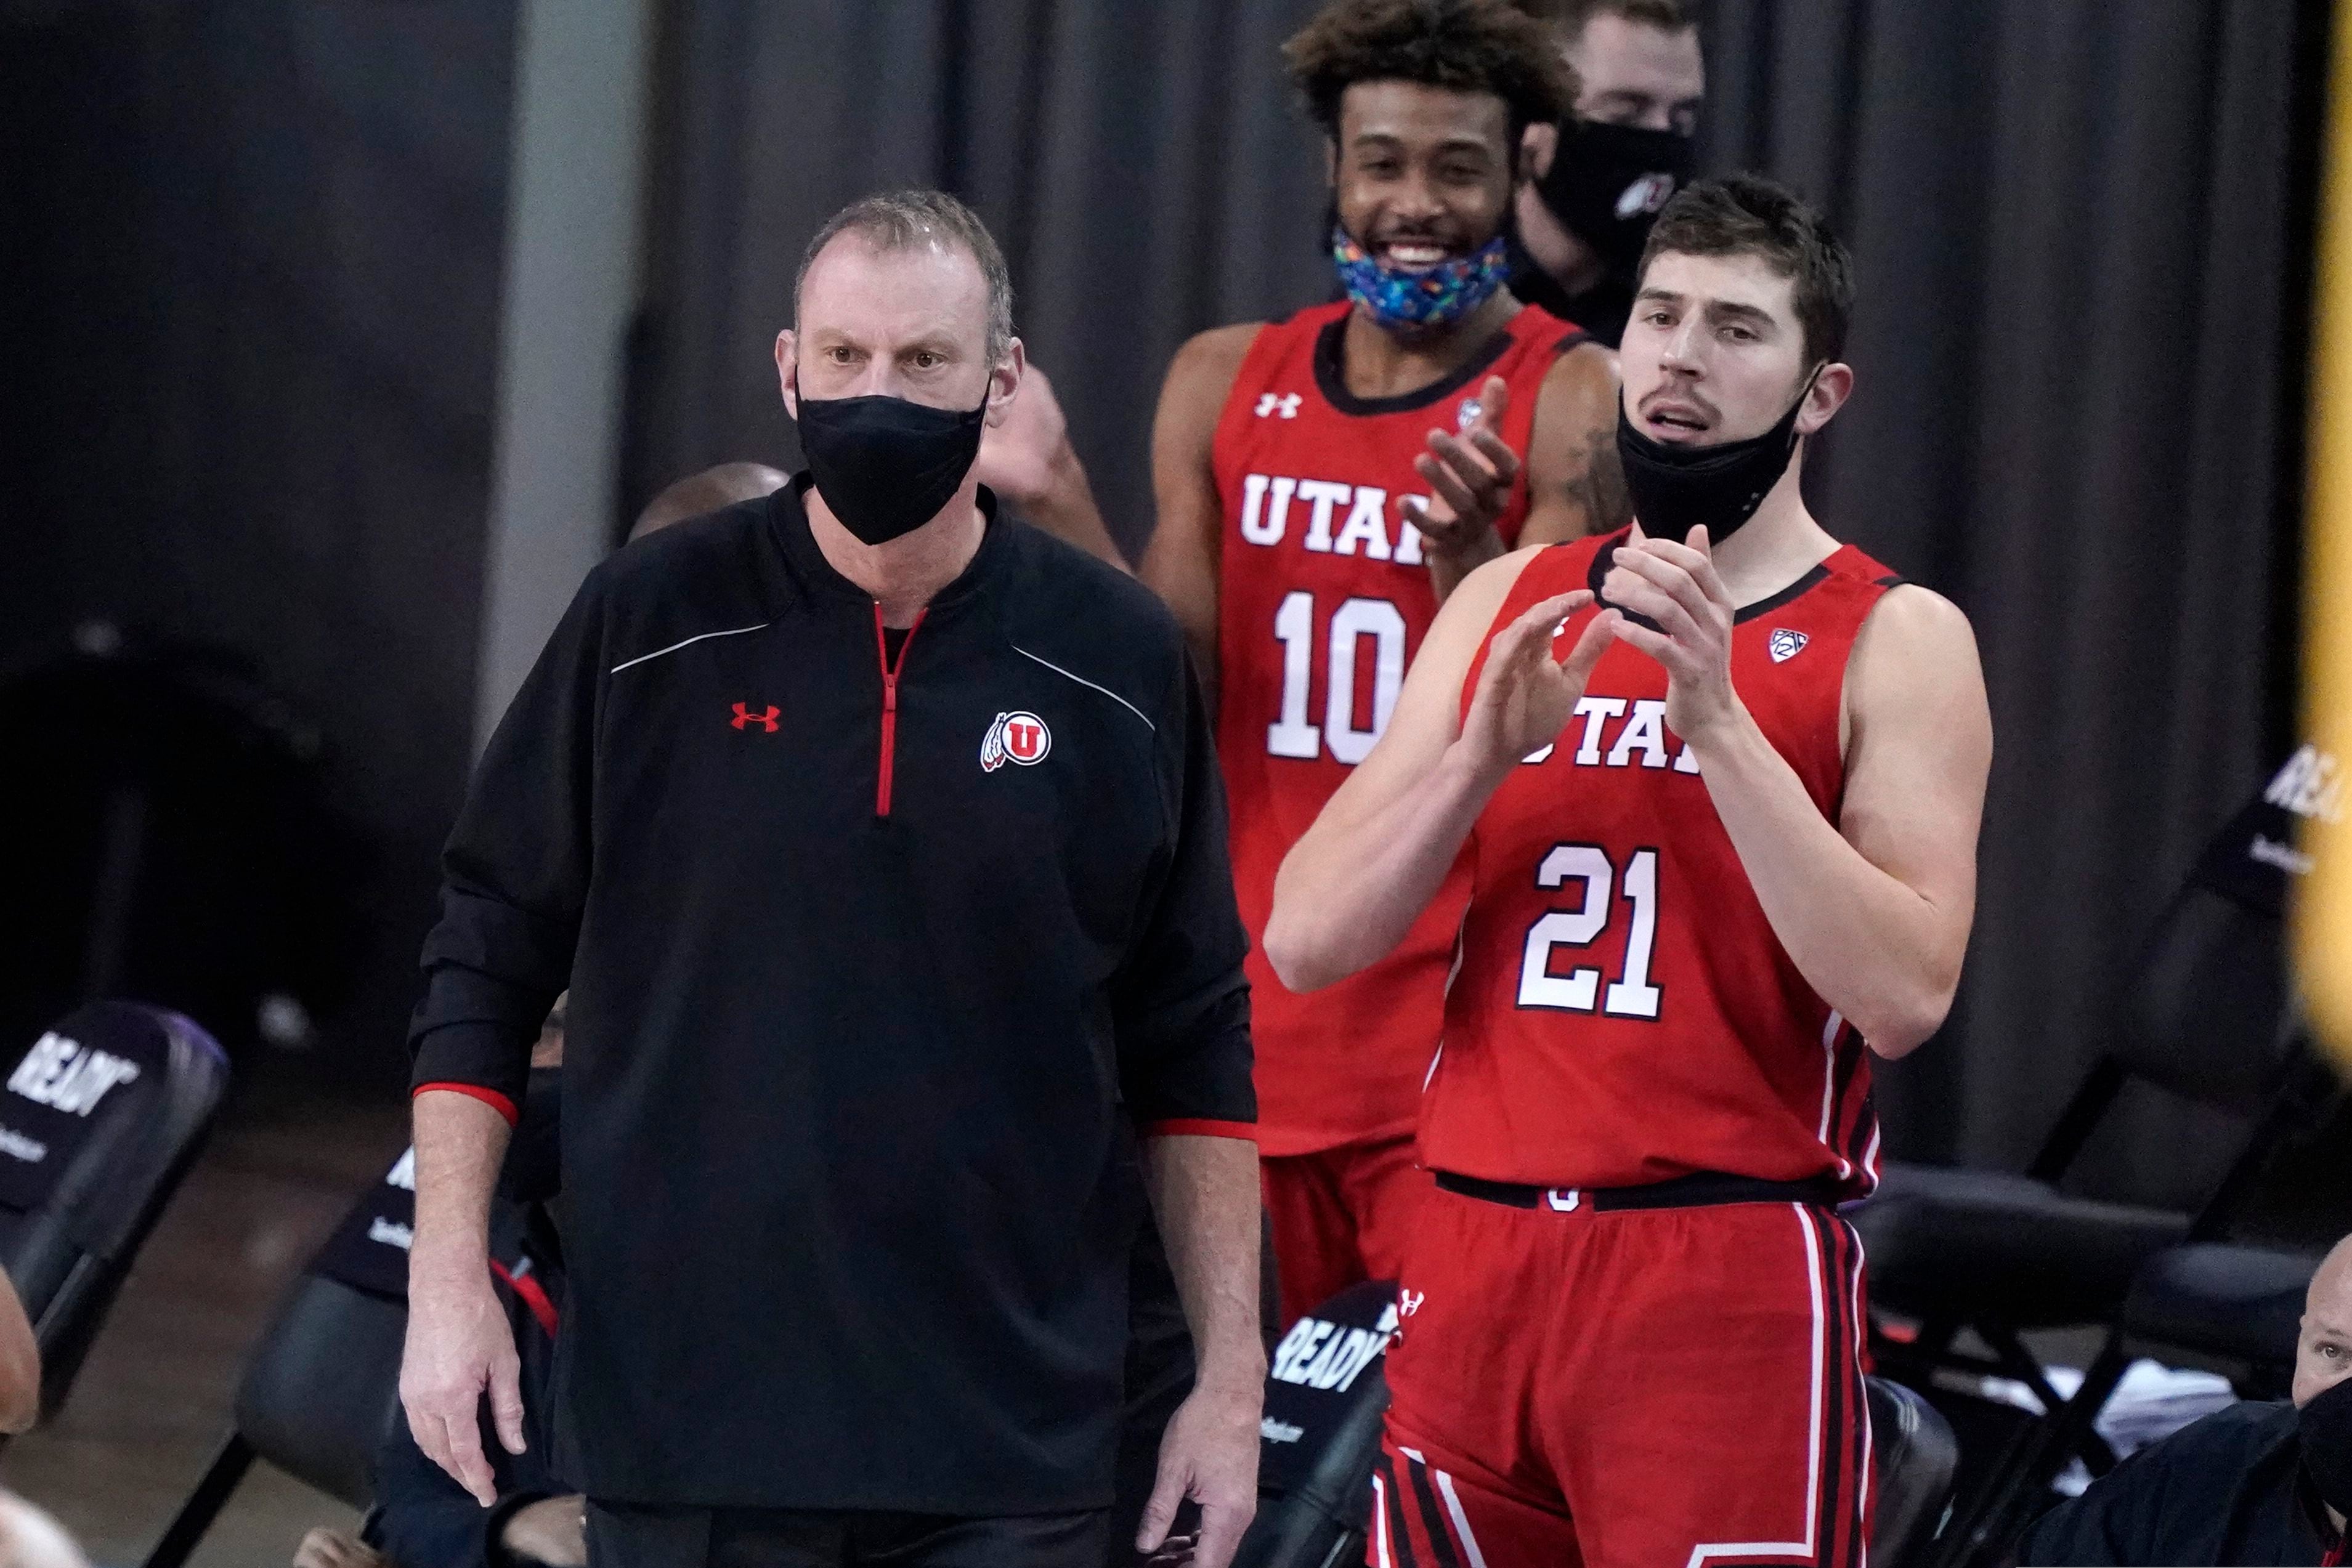 Utah coach Larry Krystkowiak, left, watches his team play against UCLA during the first half of an NCAA college basketball game Thursday, Dec. 31, 2020, in Los Angeles. (AP Photo/Marcio Jose Sanchez)